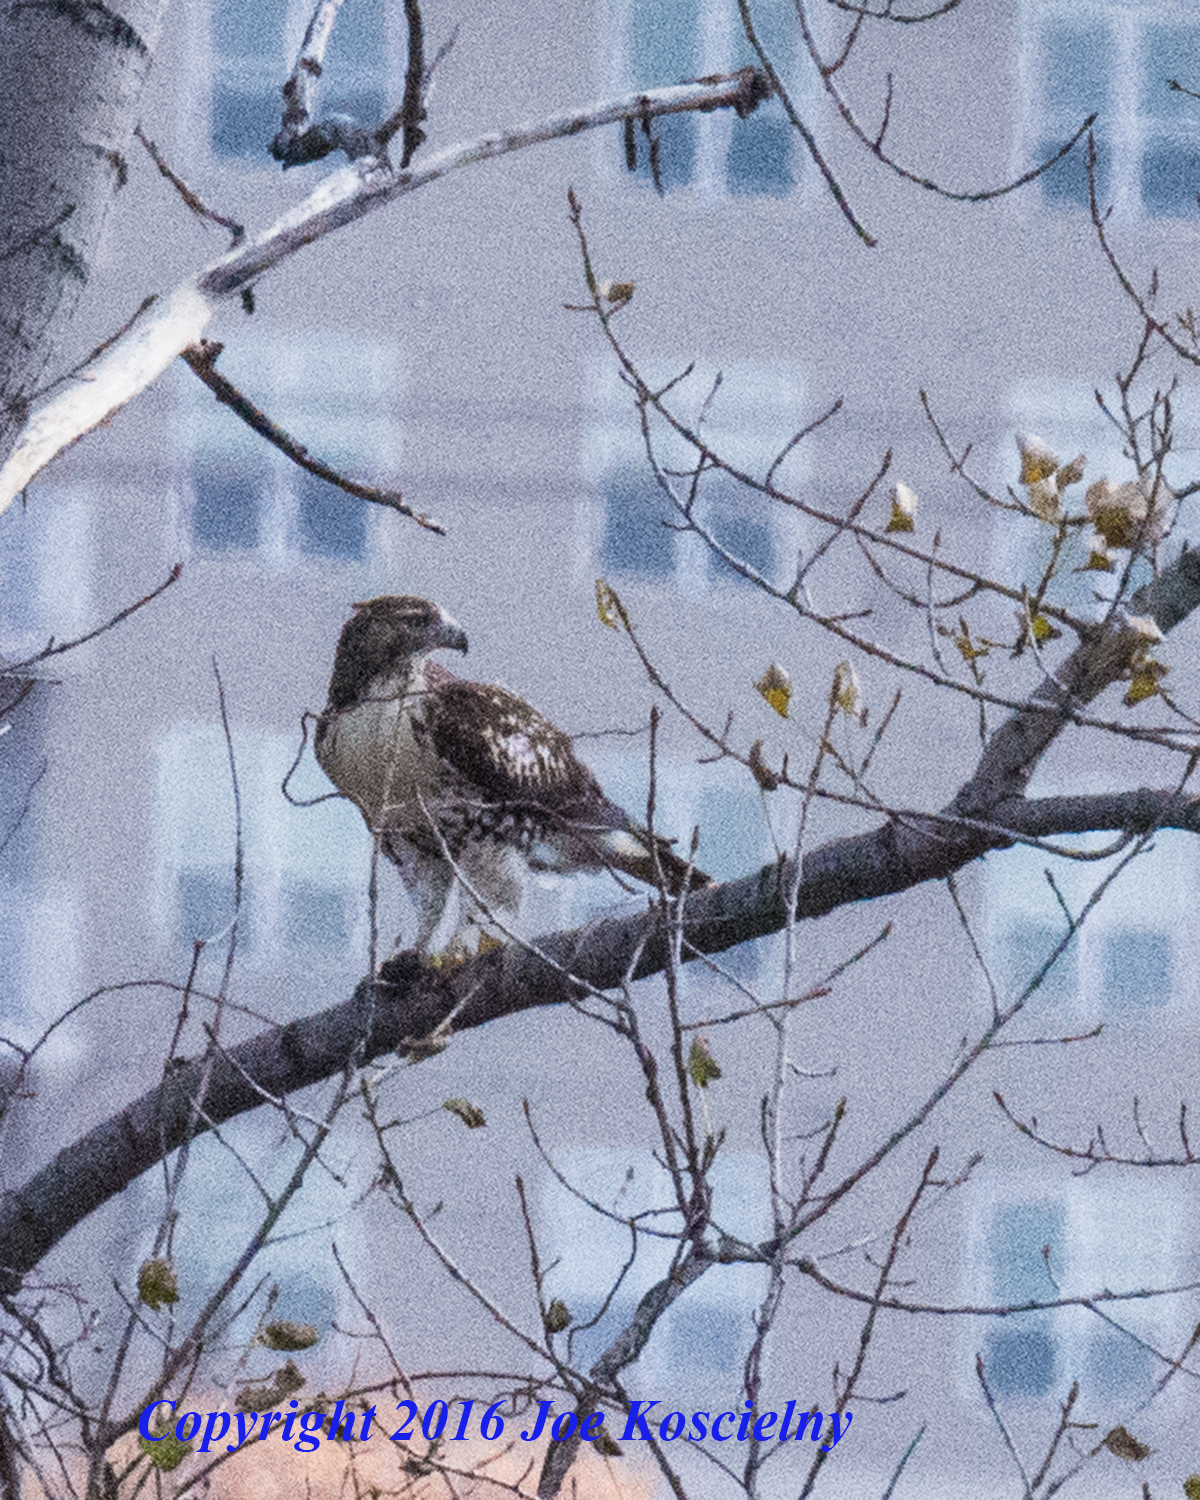 red-tailed-hawk-mcm-11-6-16